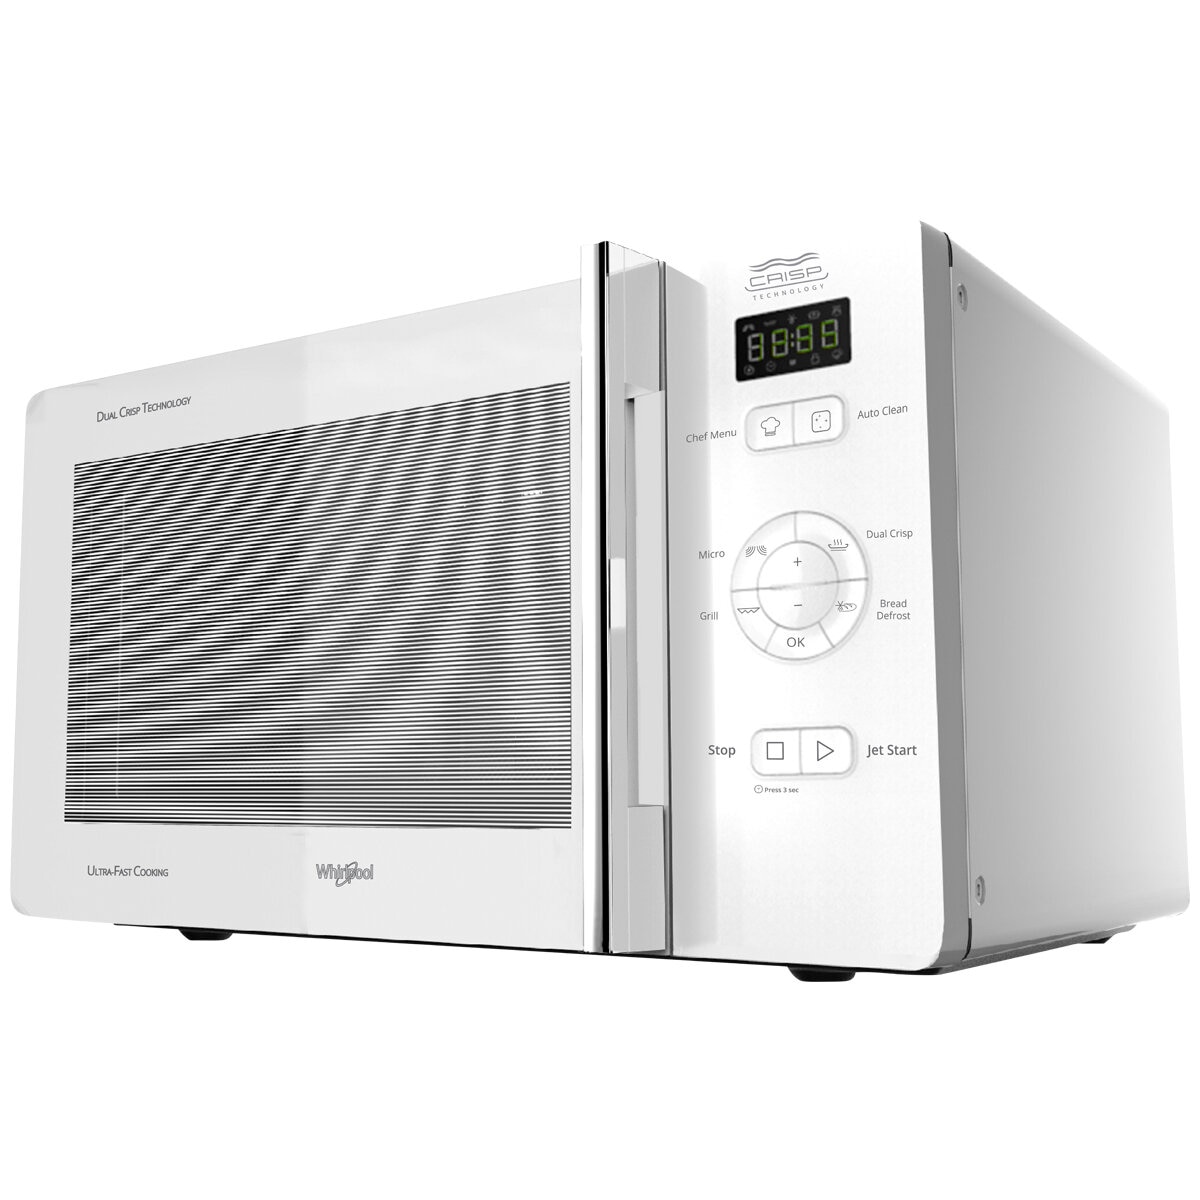 Whirlpool Crisp N’ Grill 25L Microwave Oven, White